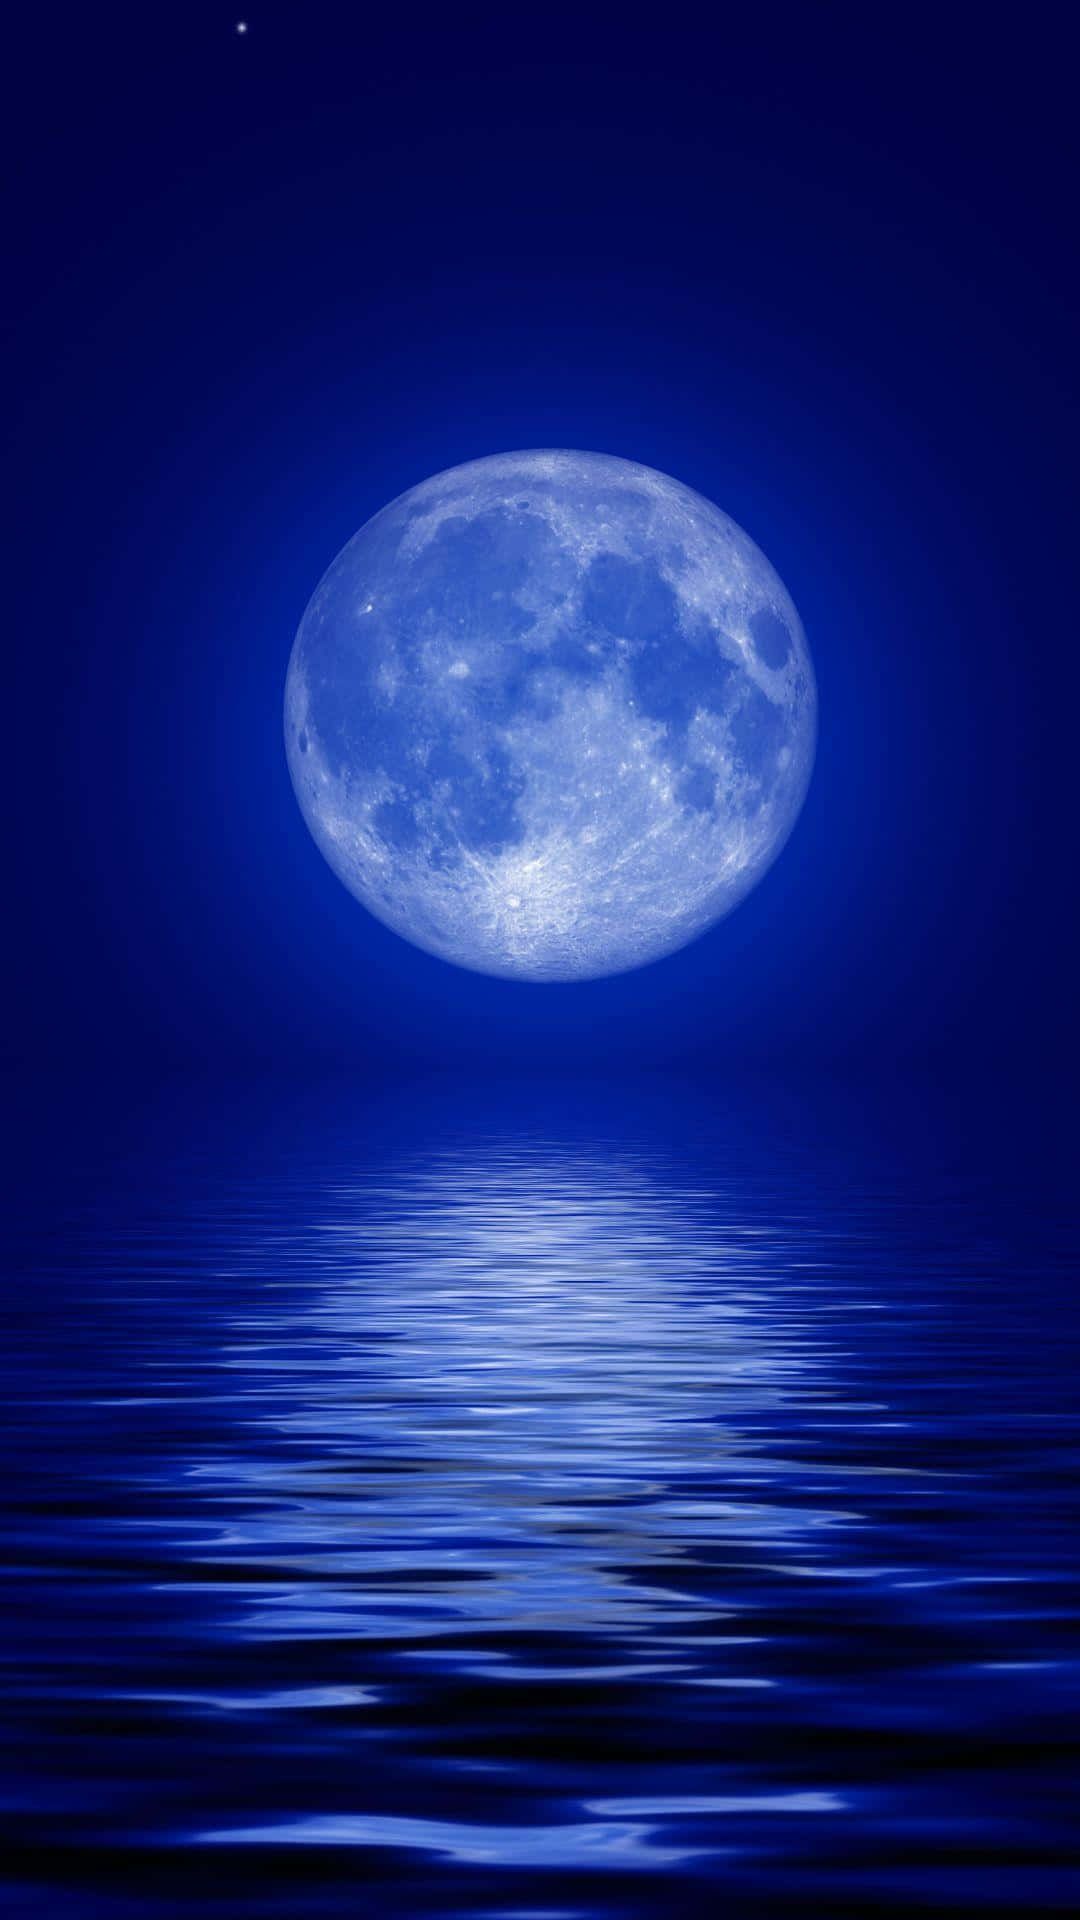 Experience the natural beauty of the night sky with the Moon iPhone Wallpaper